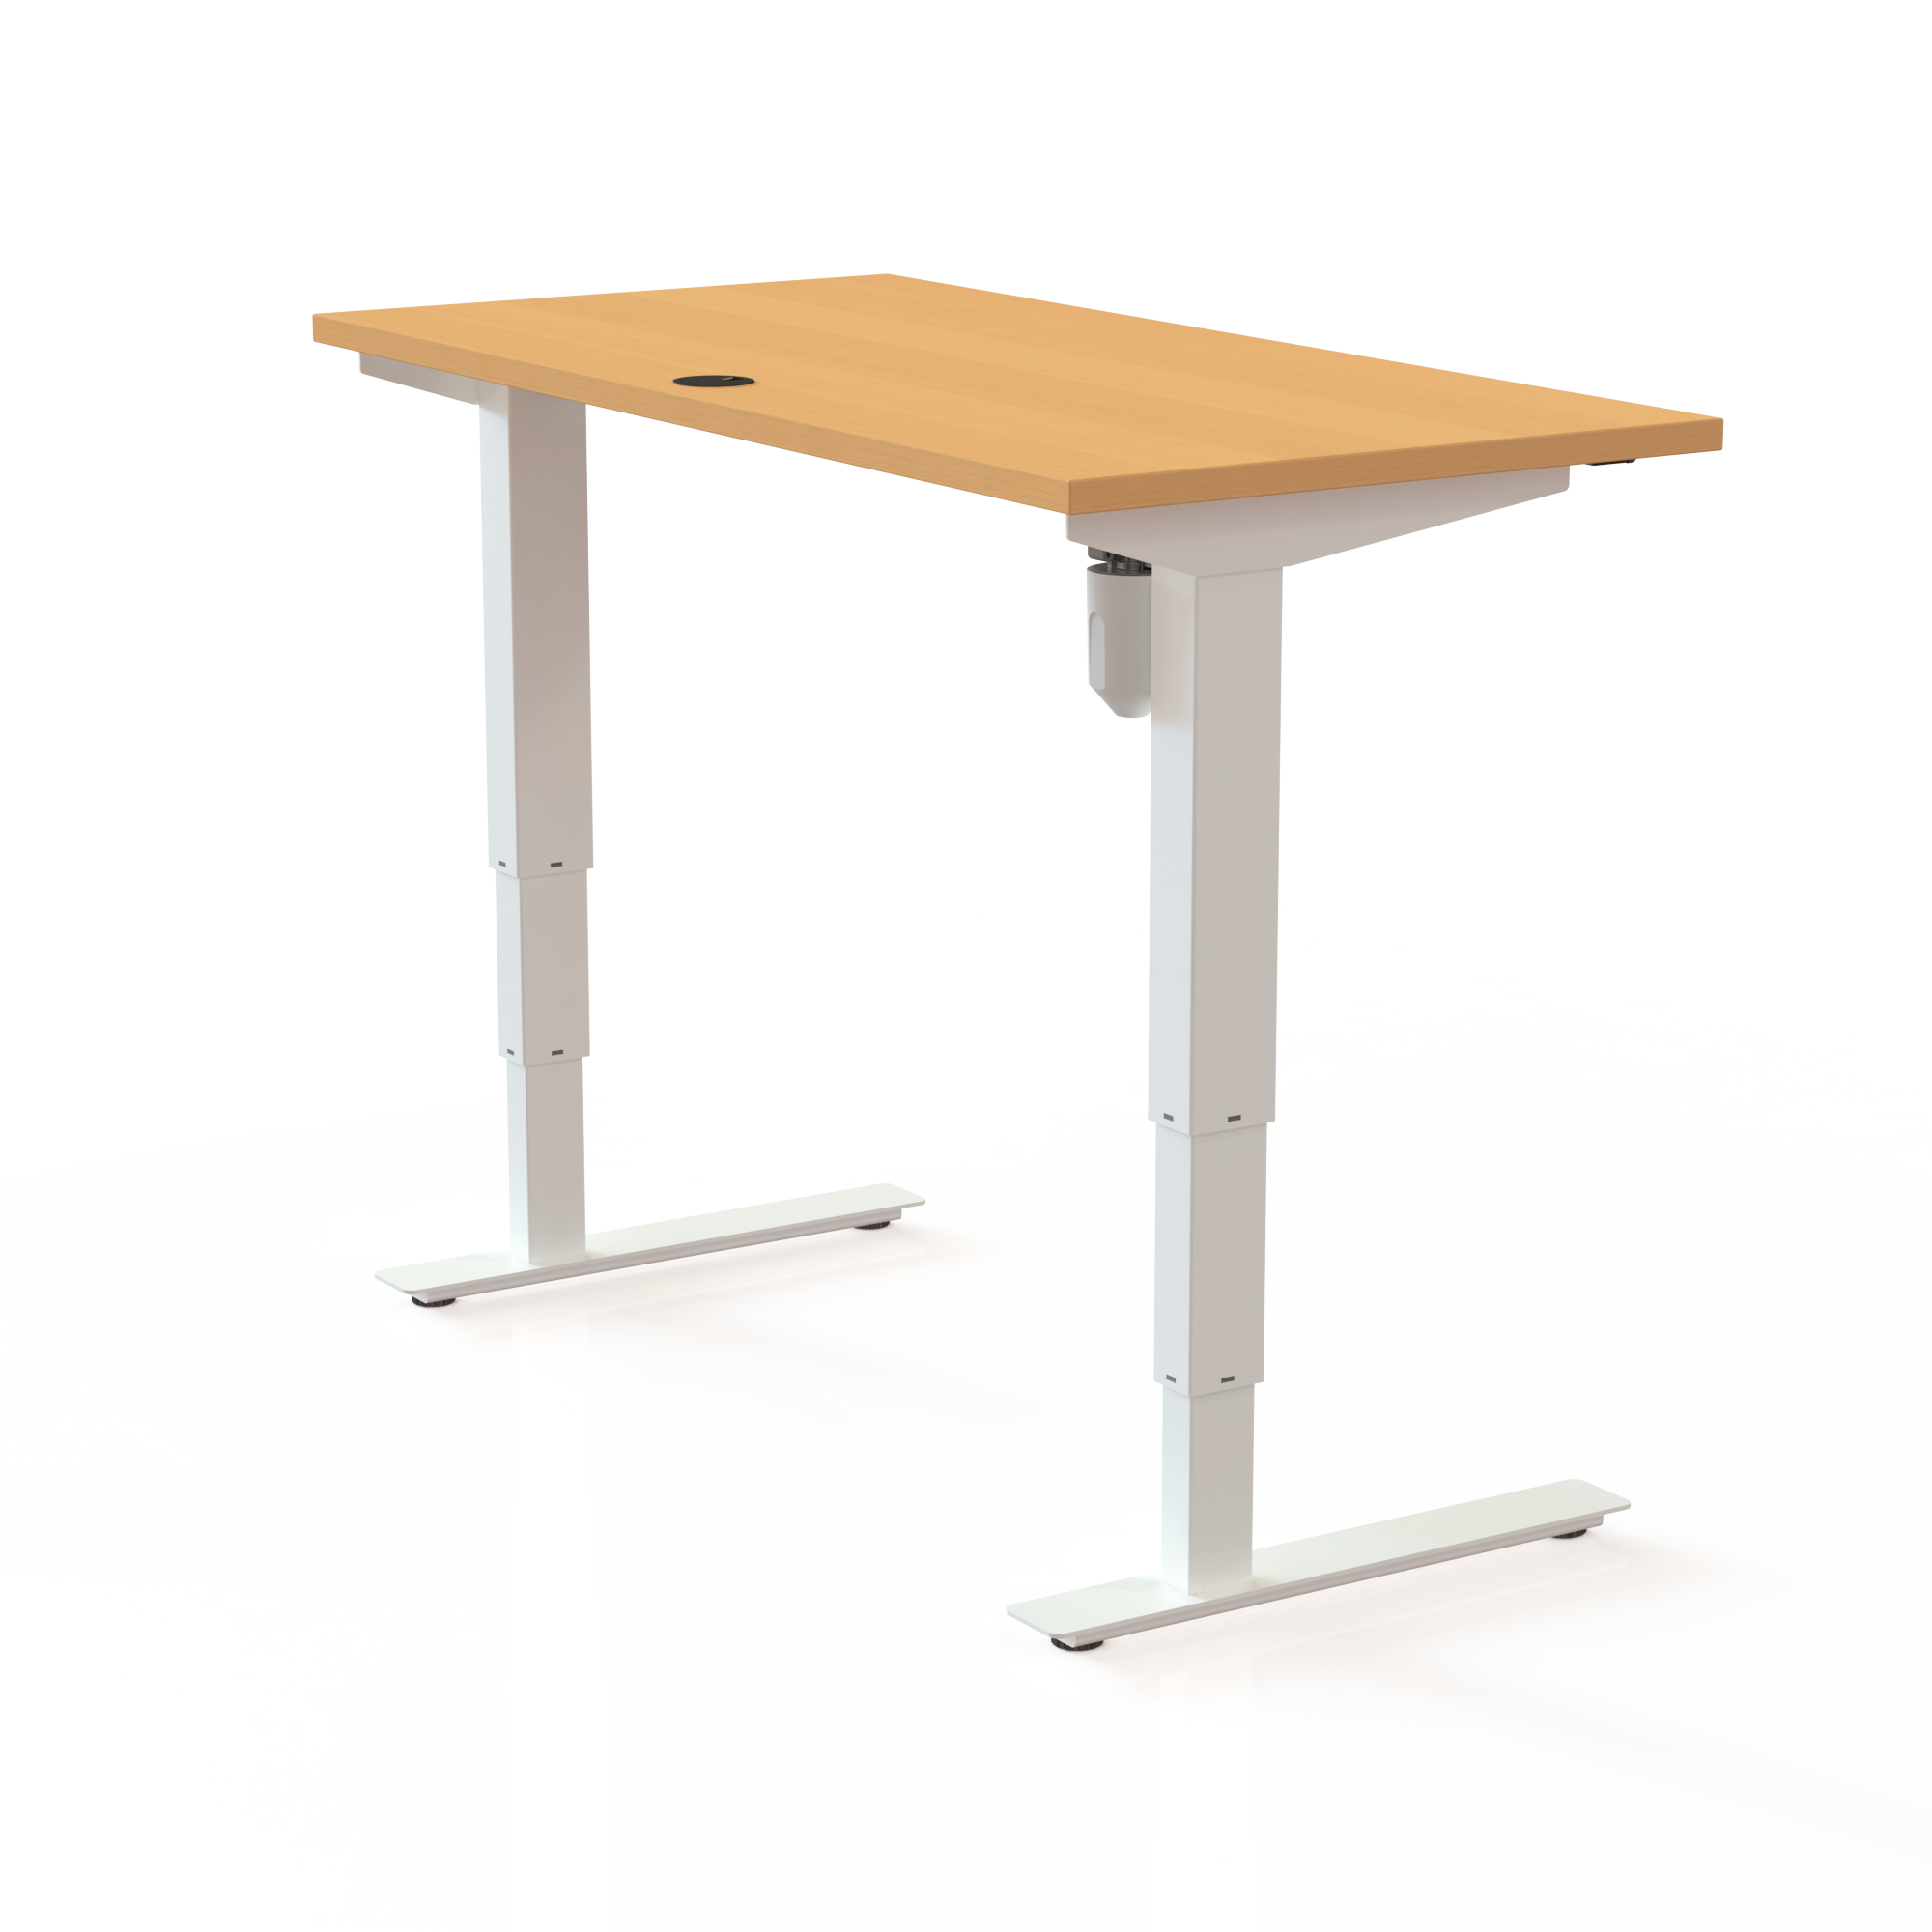 Electric Adjustable Desk | 120x60 cm | Beech with white frame